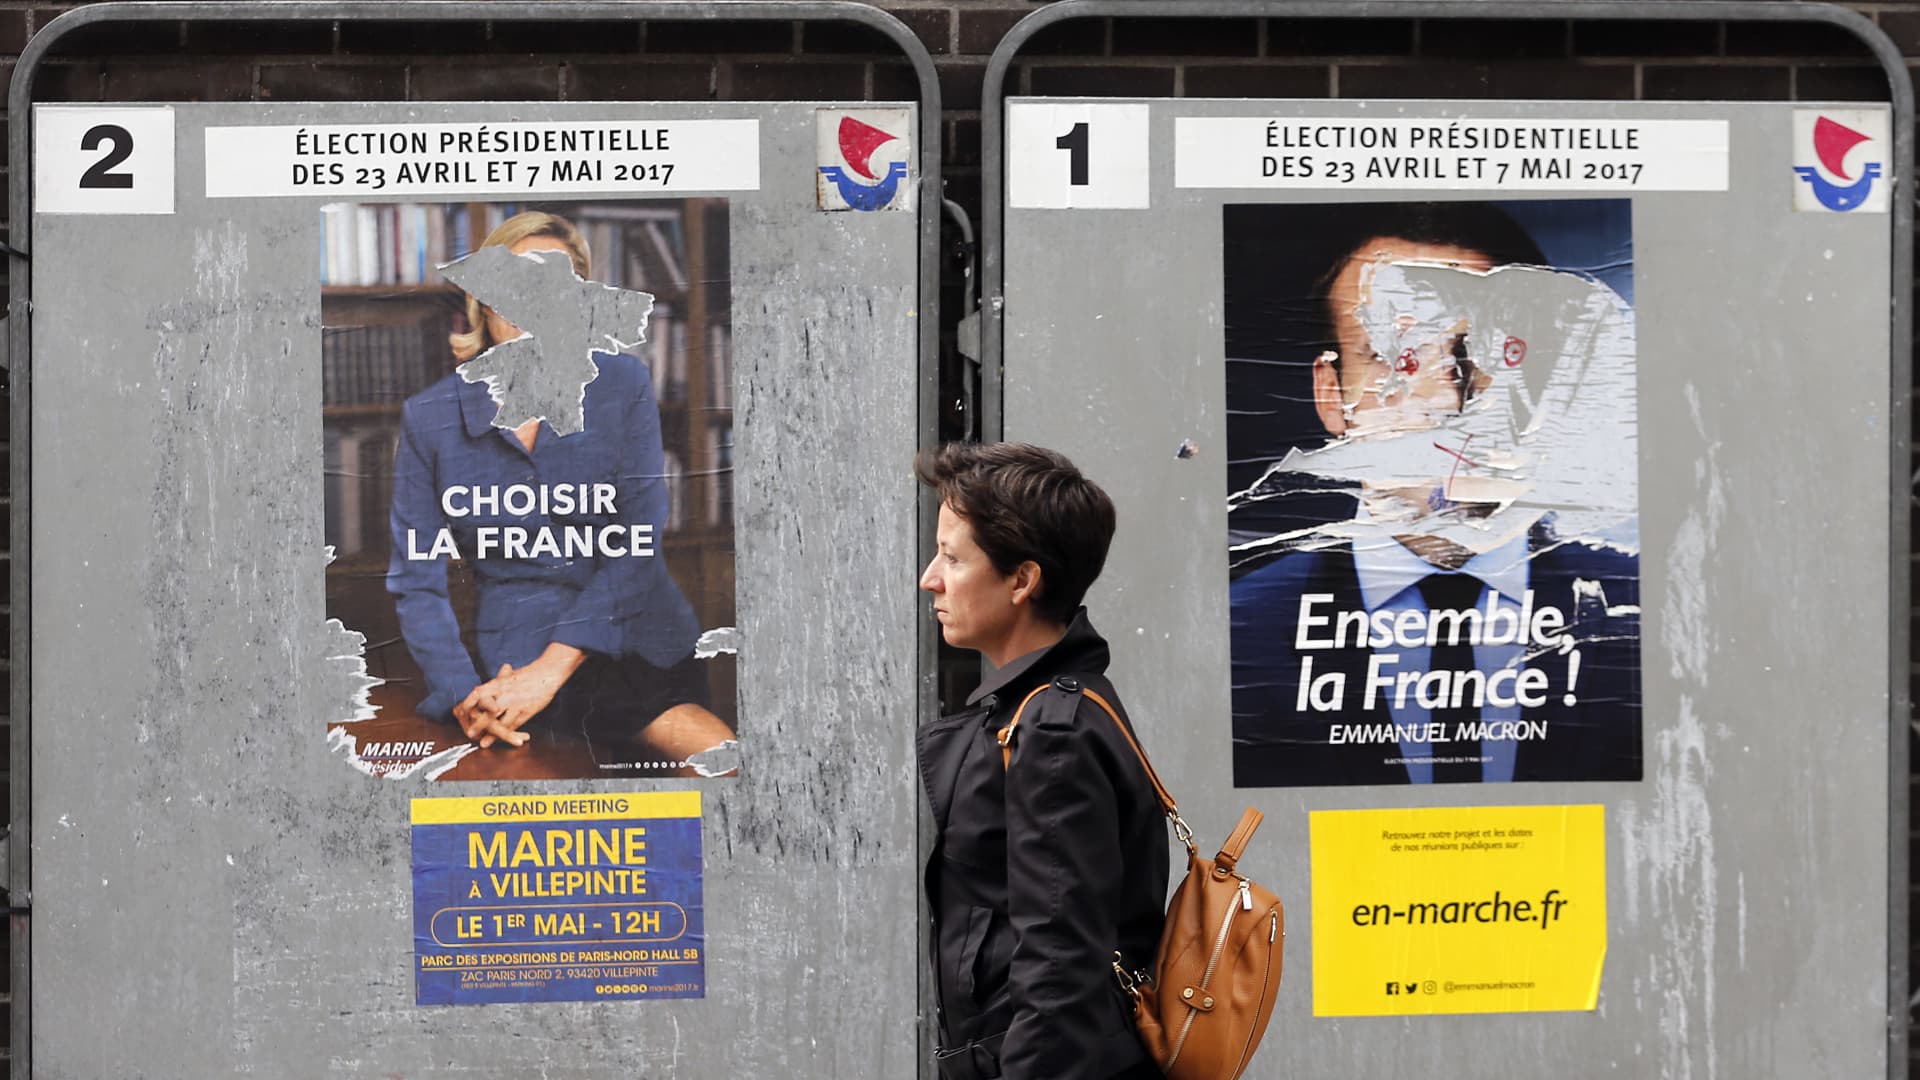 France's liberal base is aging fast. Macron now needs to win over angry younger voters